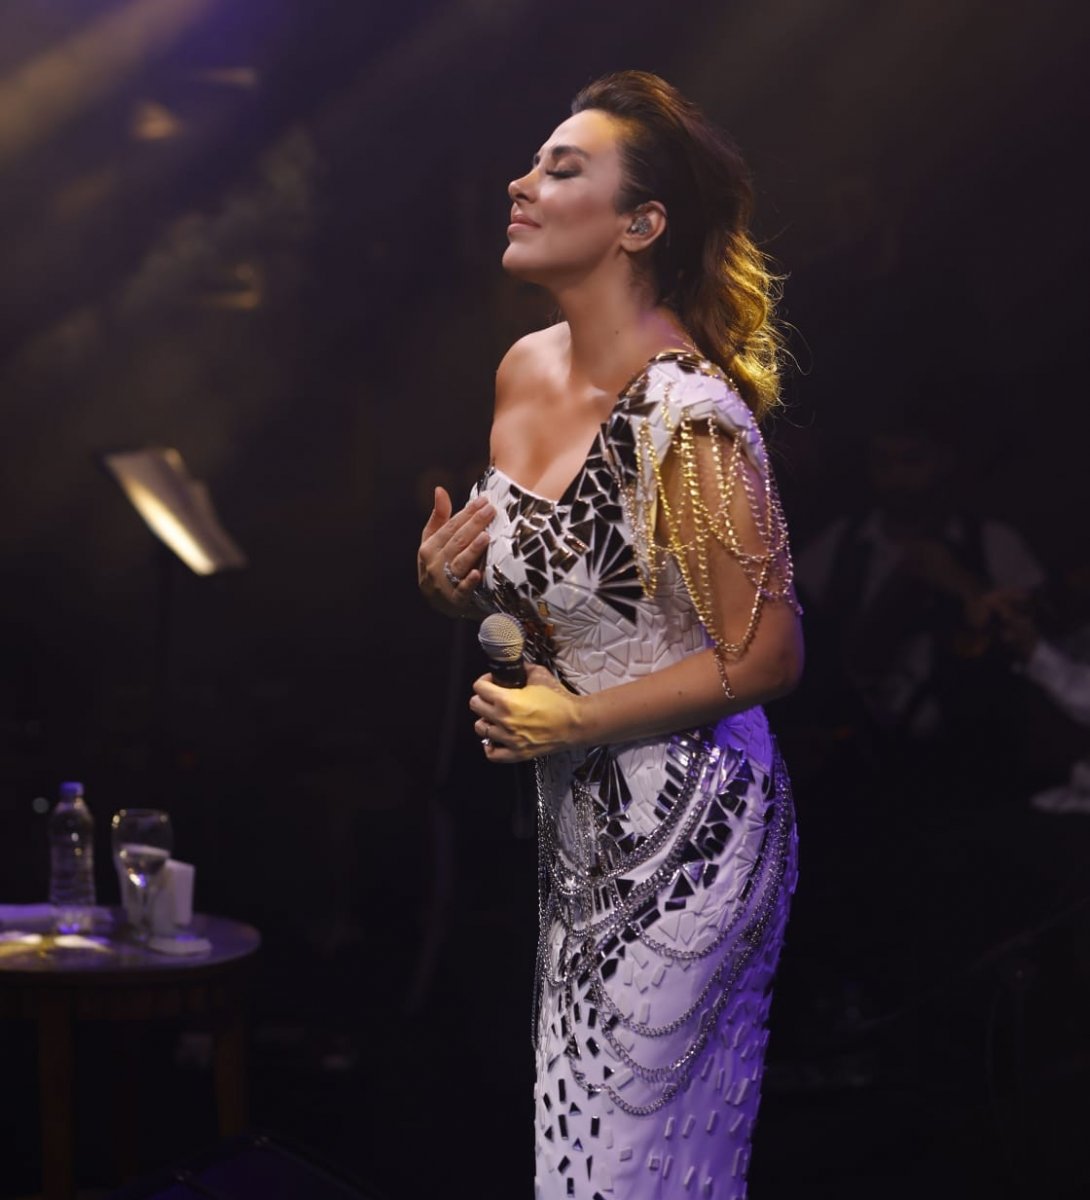 Aslı Hünel wore a costume consisting of 1500 pieces of porcelain in her concert #1